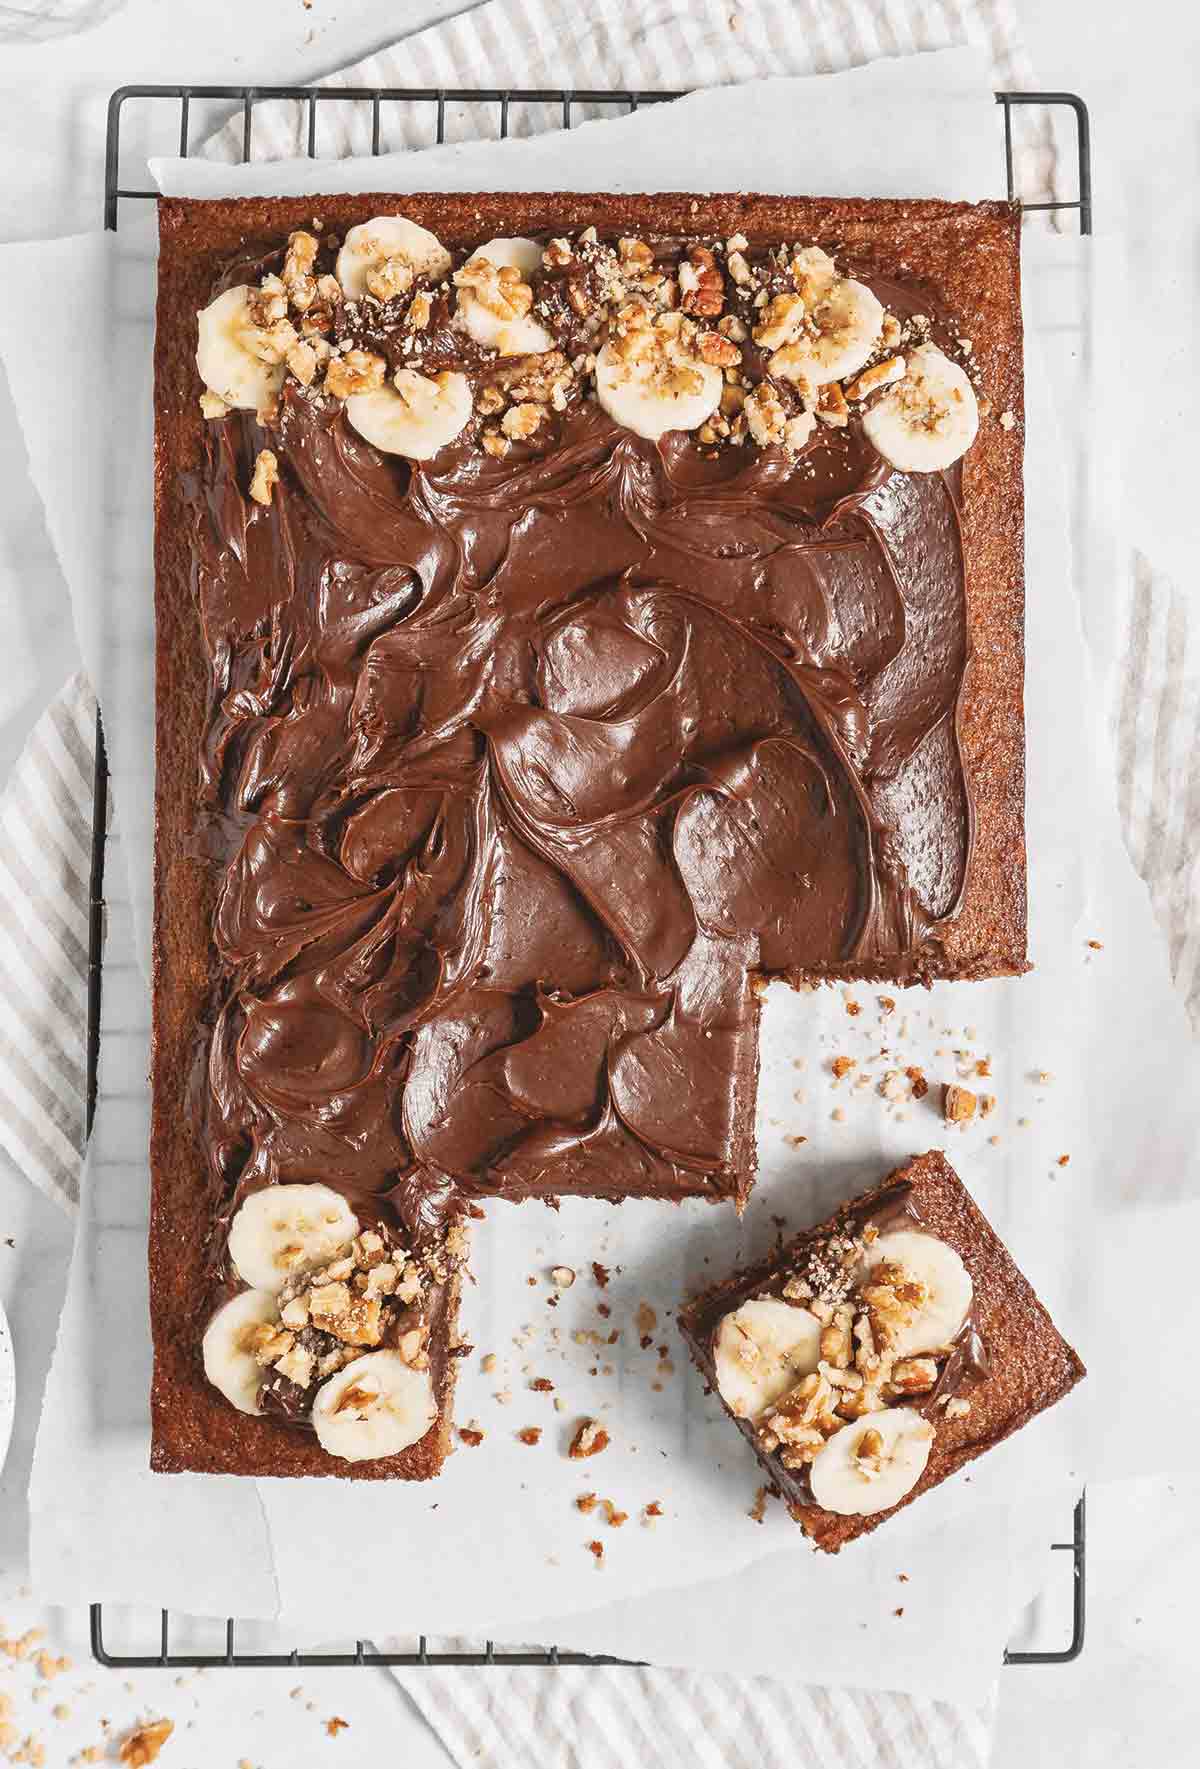 Brown butter banana bread sheet cake on a wire rack, with a few pieces cut out and garnished with bananas and chopped nuts.